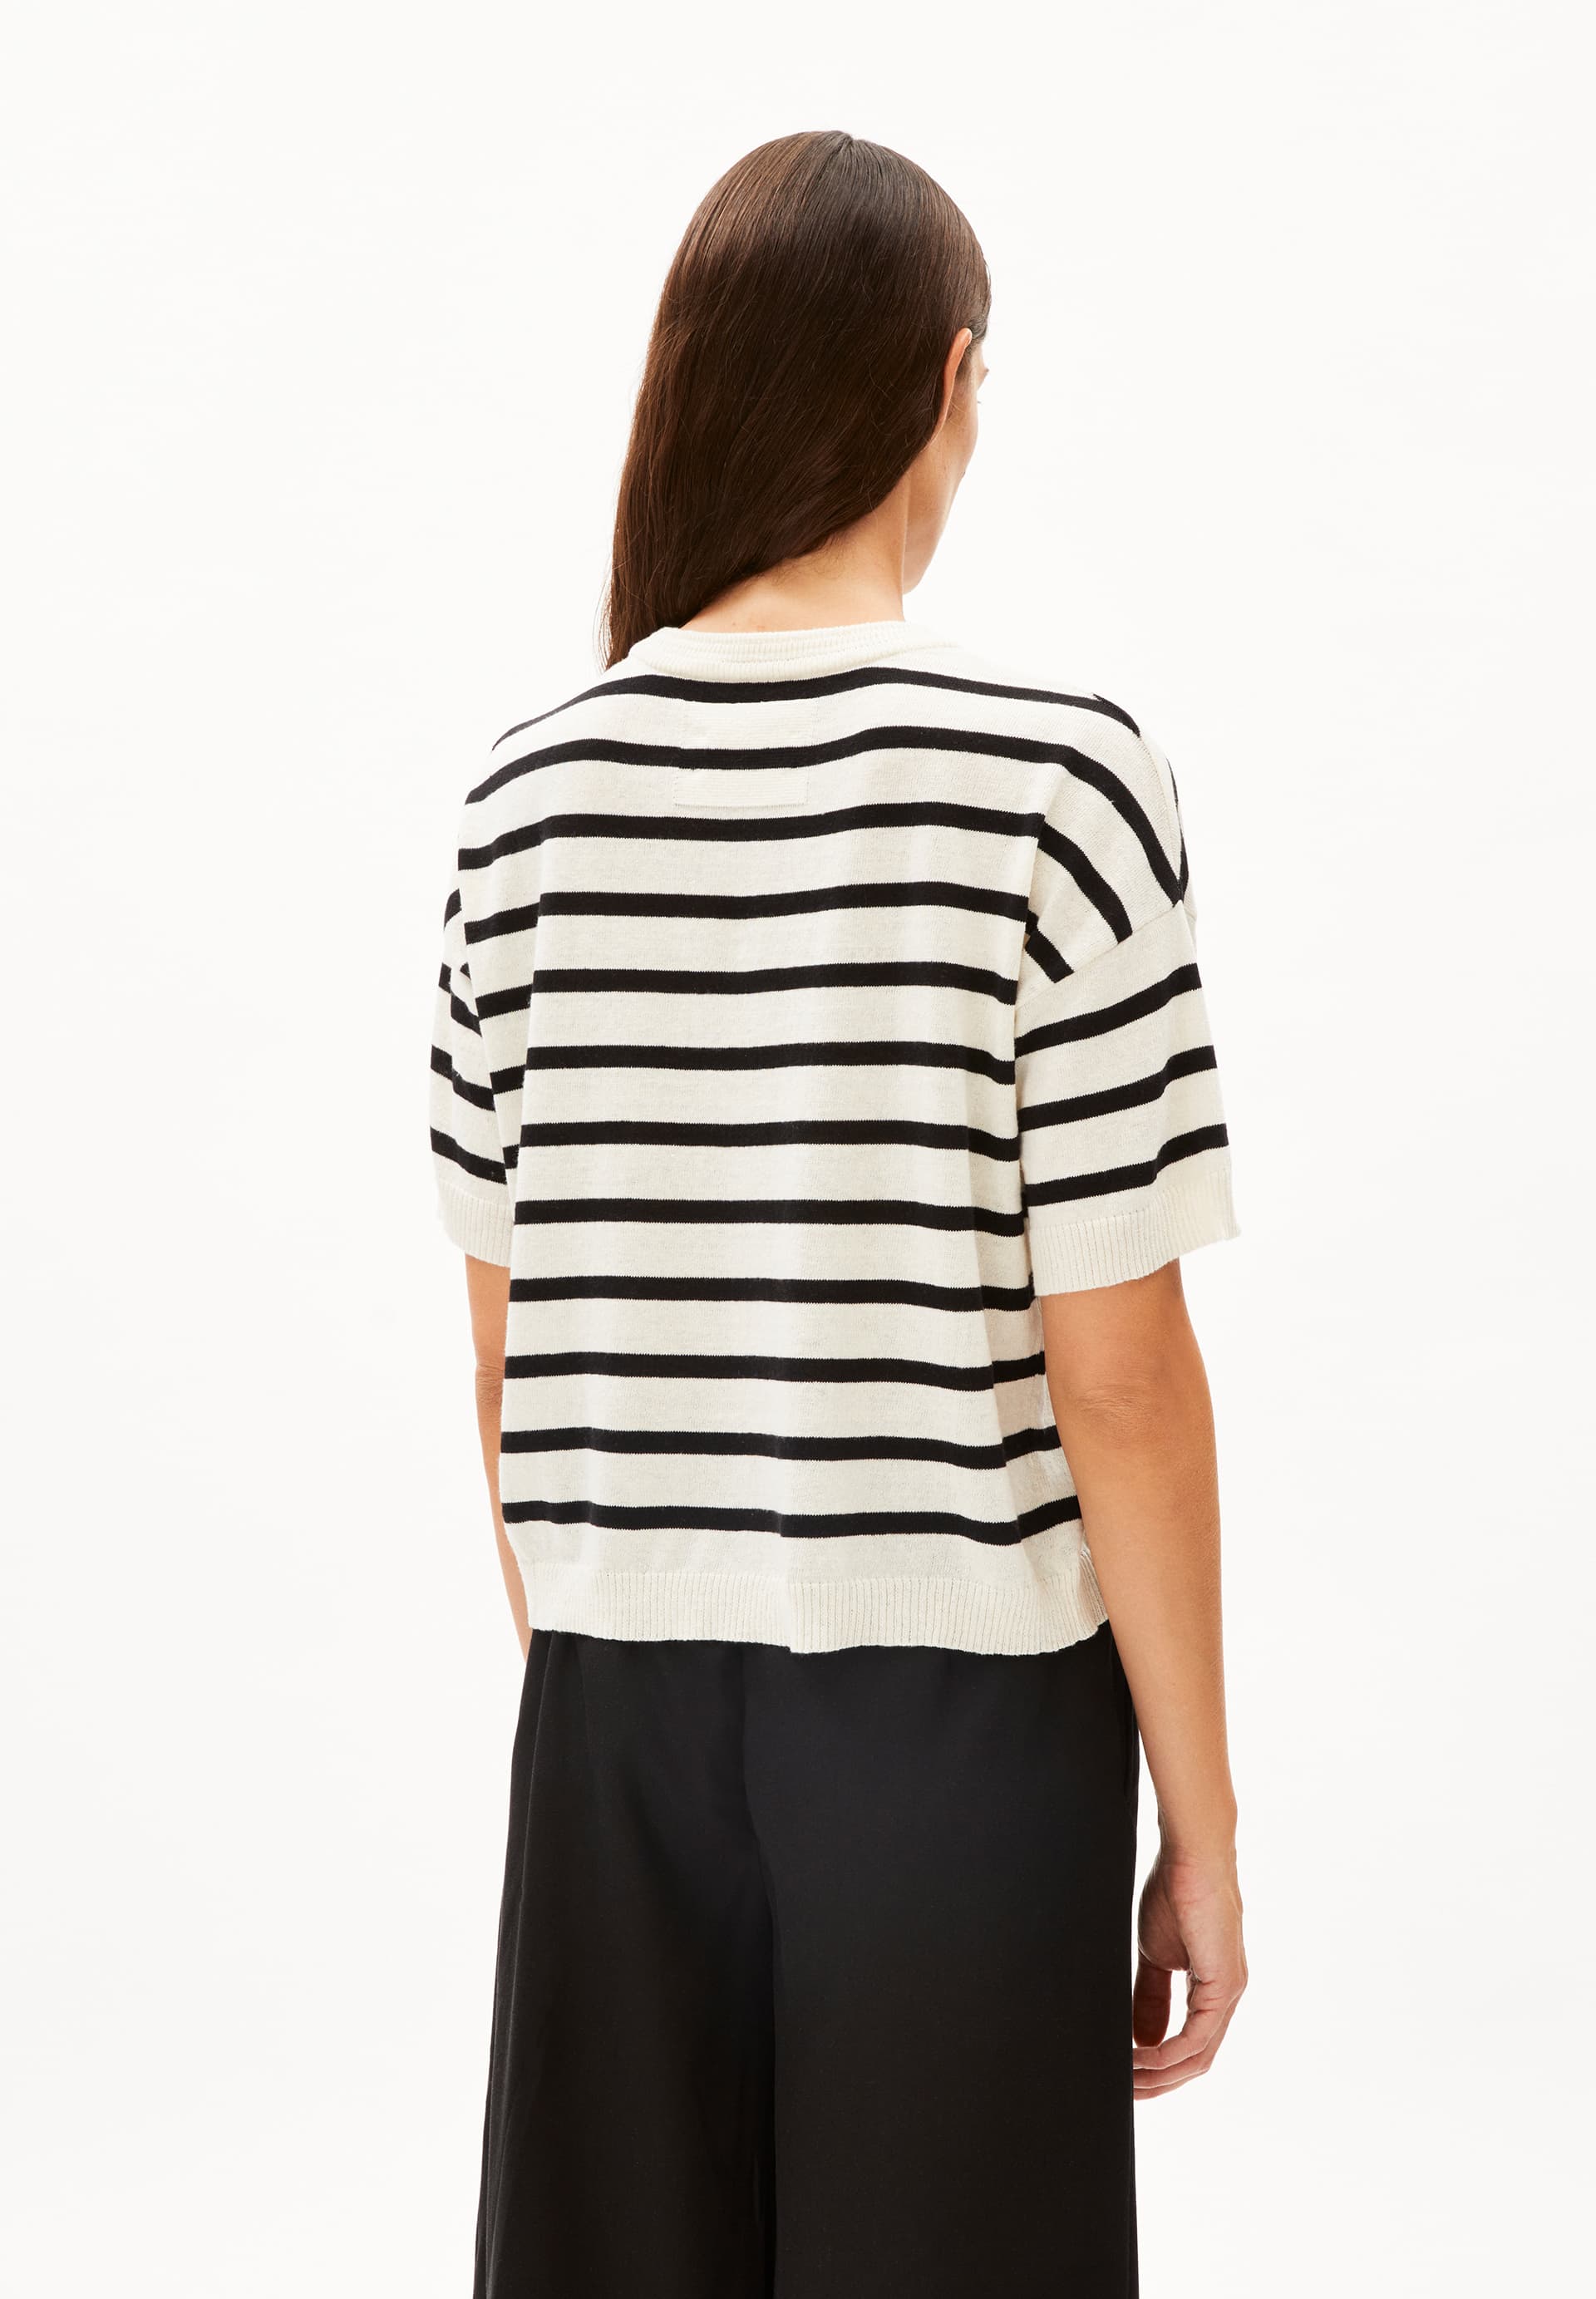 LILLAAS STRIPES Knit Shirt Loose Fit made of Linen-Mix